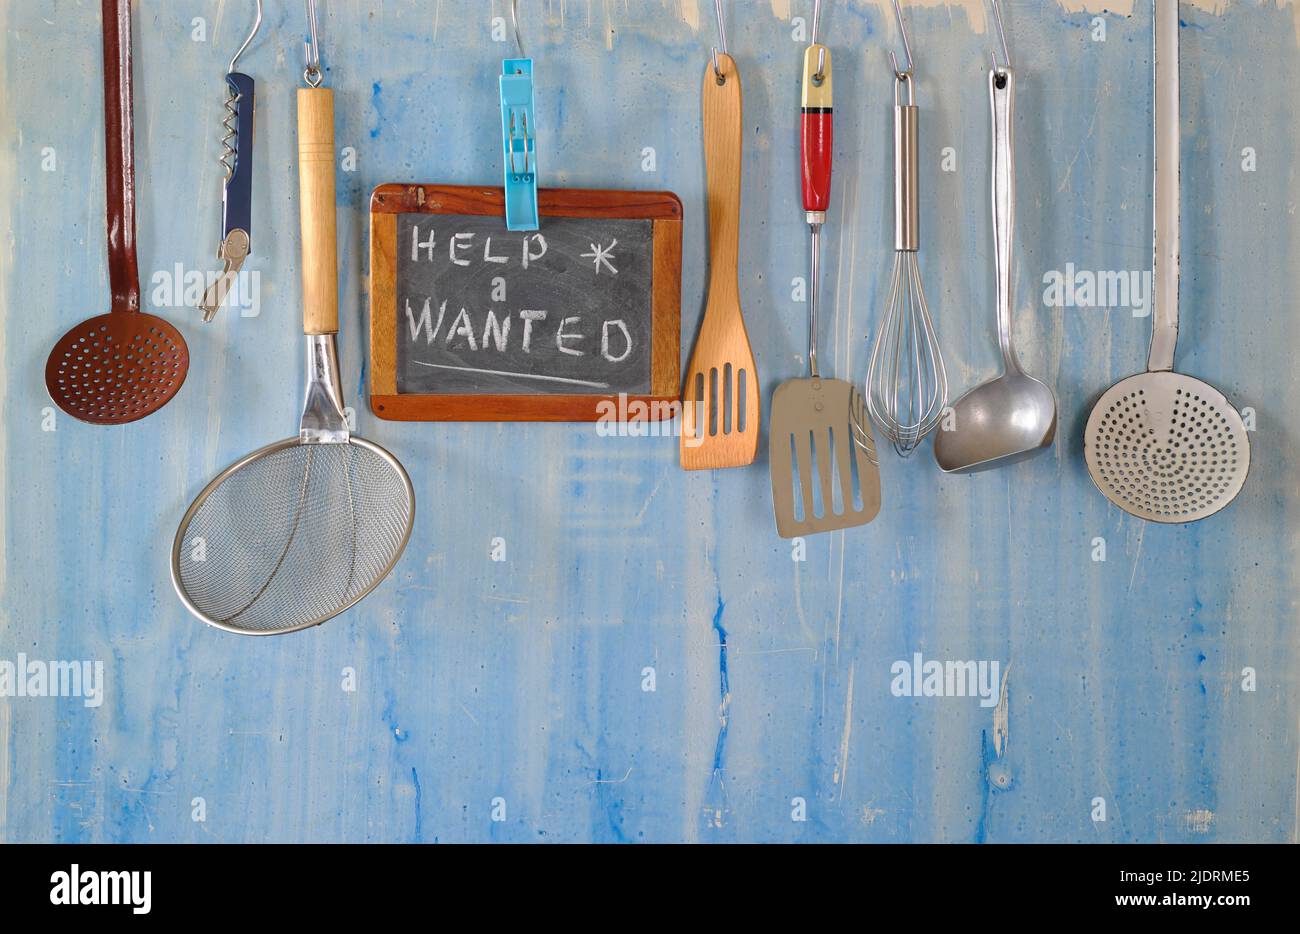 Help wanted sign,restaurant or cafe loking for staff after corona lockdown, kitchen utesnils and message on blackboard Stock Photo